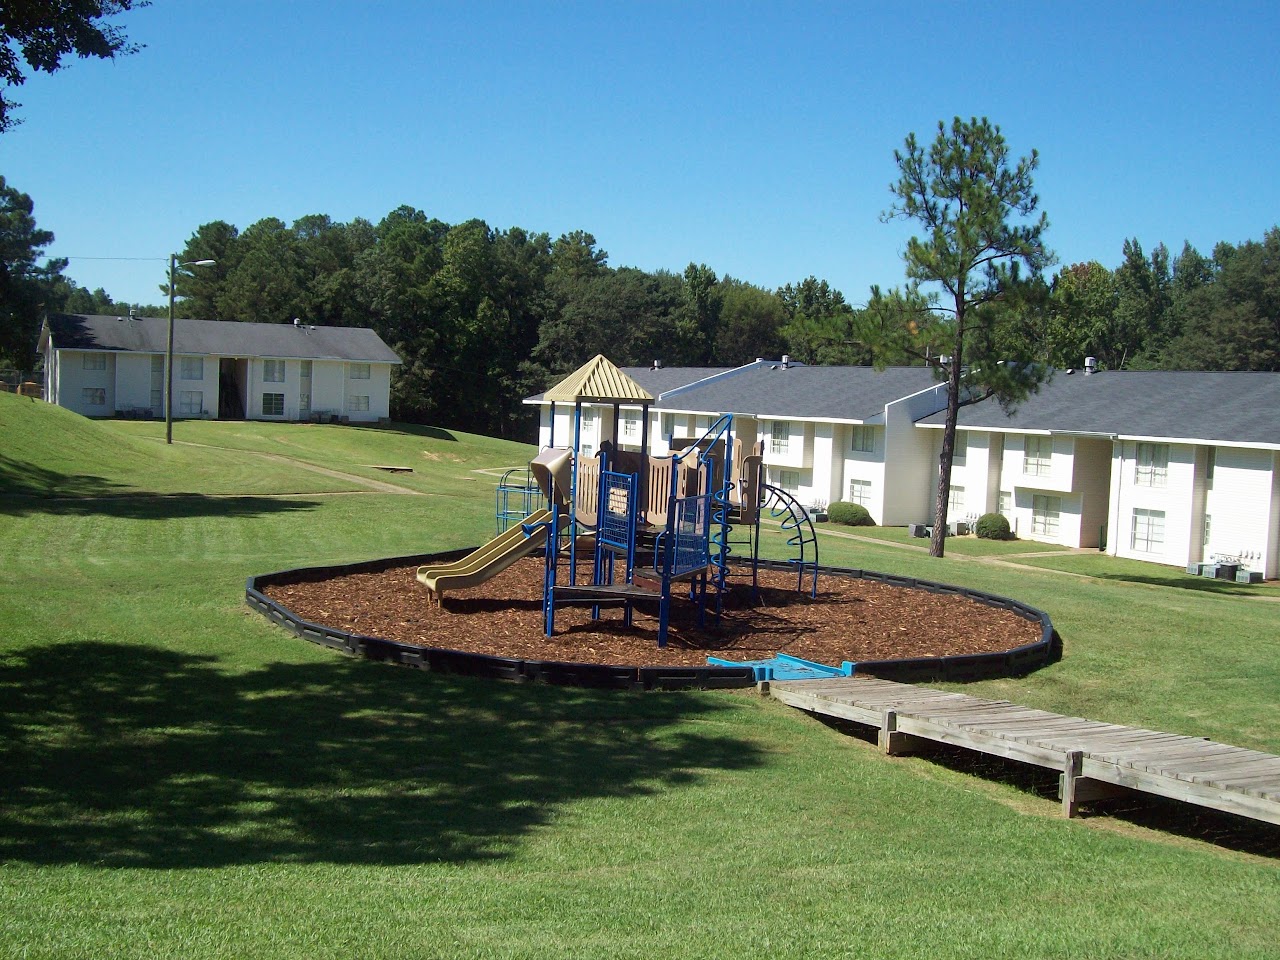 Photo of FORRESTER GARDENS. Affordable housing located at 1350 JAMES I HARRISON JR PKWY E TUSCALOOSA, AL 35405